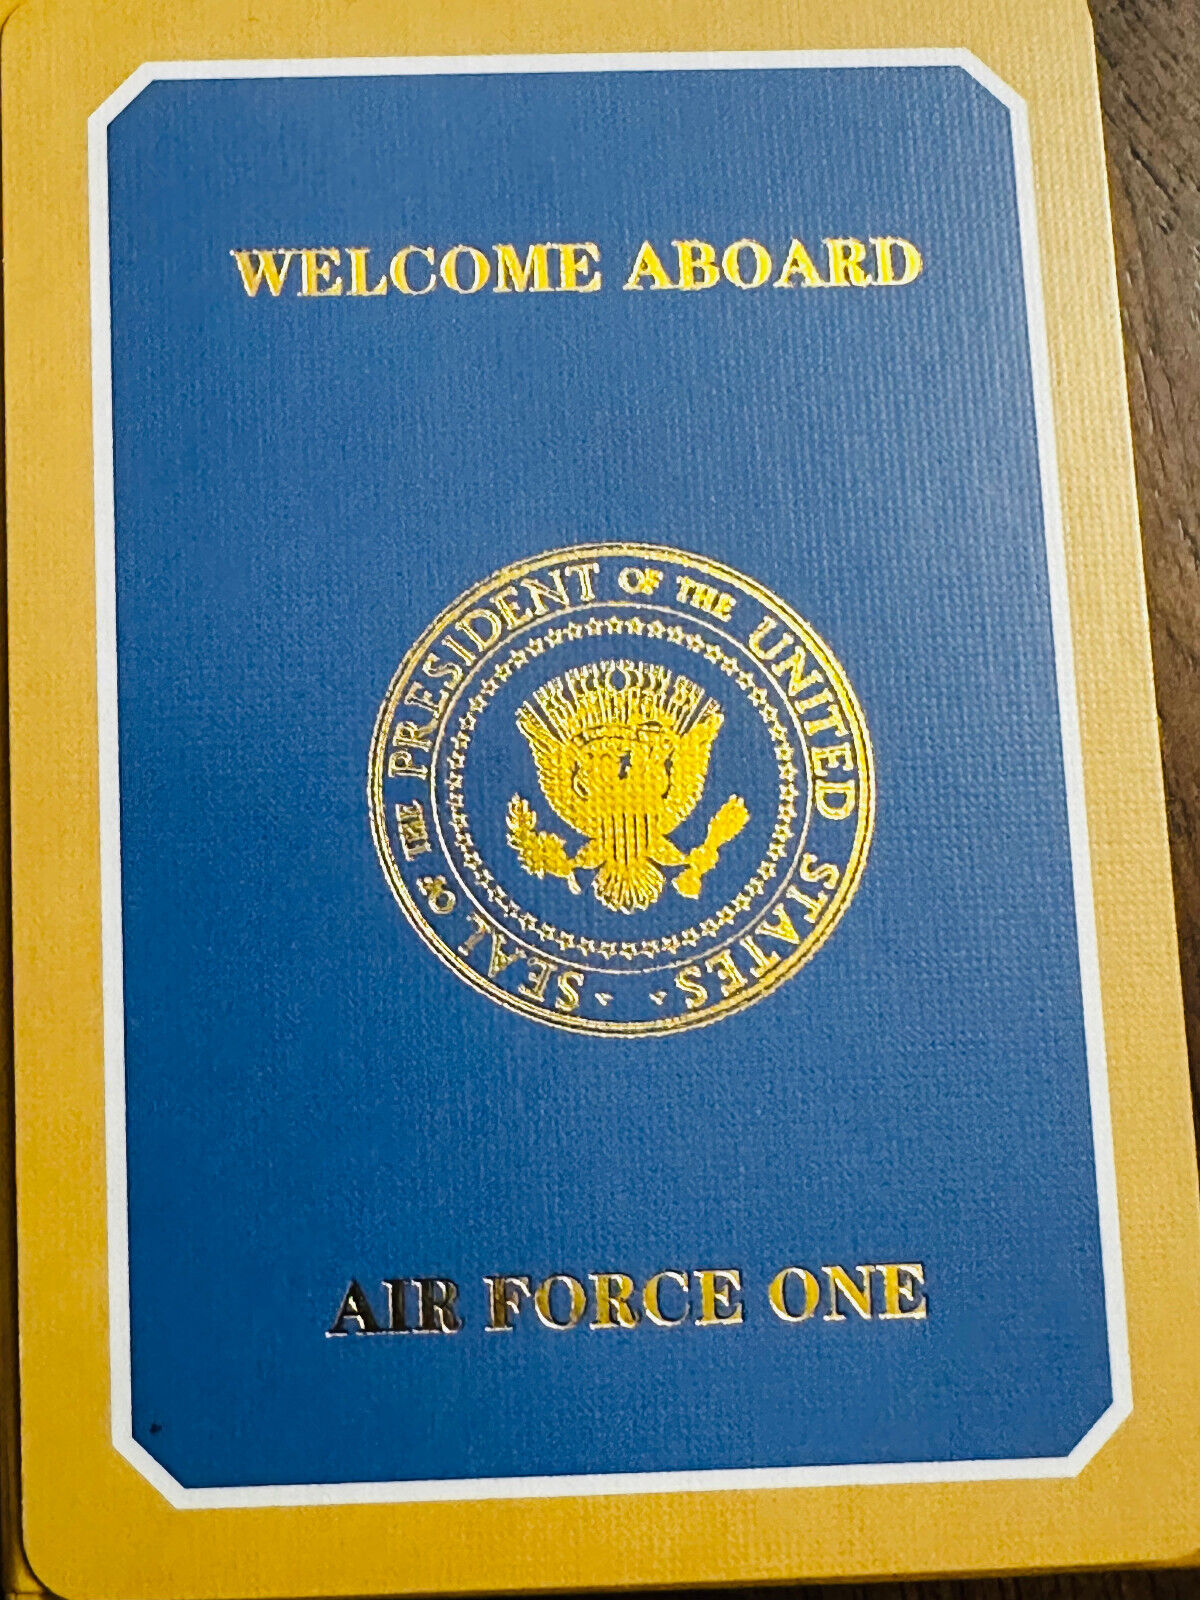 President of the United States Air Force One Welcome Aboard VVIP Playing Cards